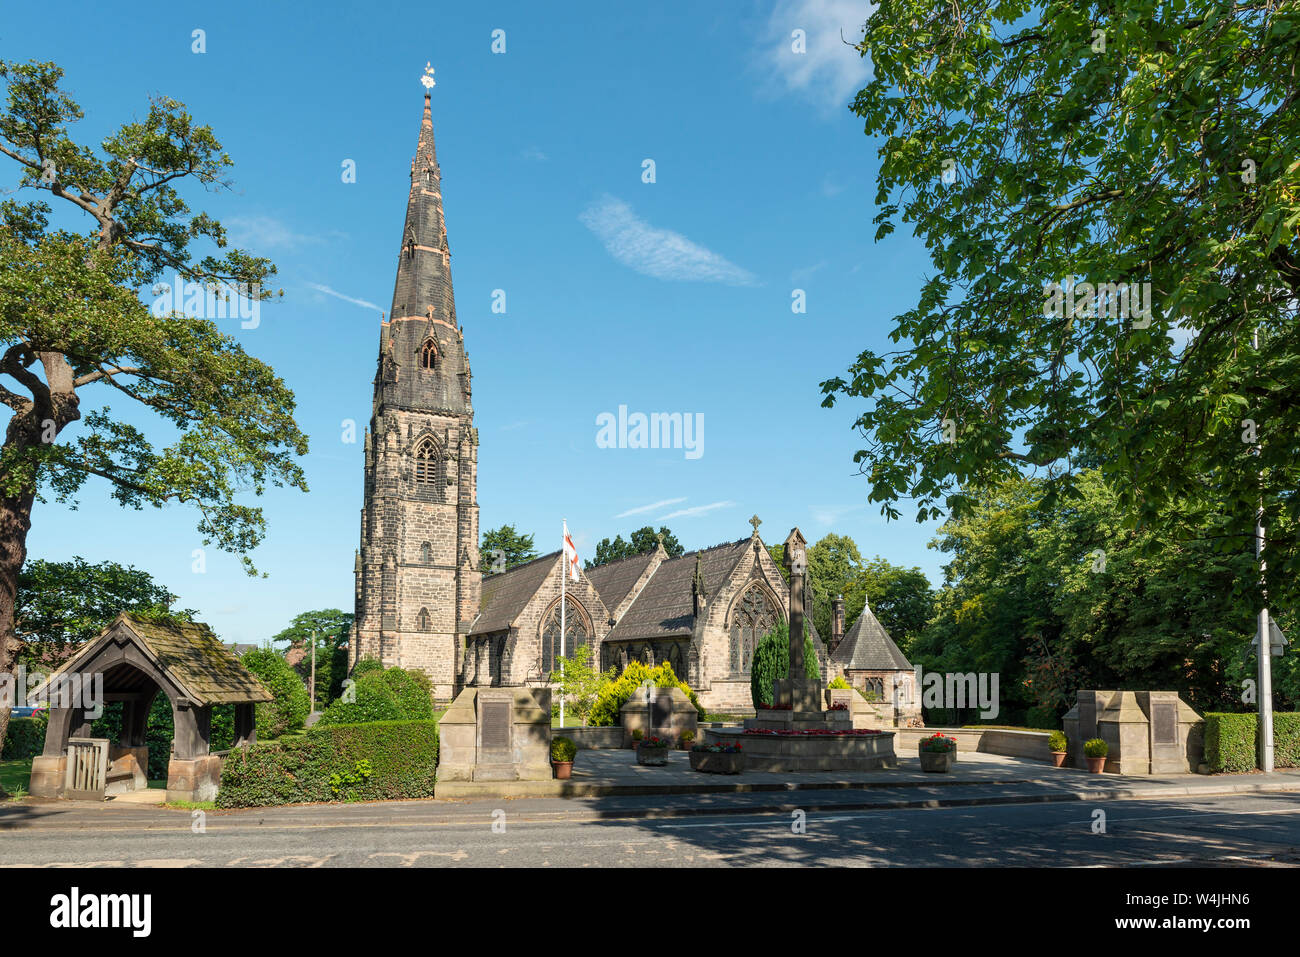 The Parish Church of St Philip and St James on Ryleys Lane in the small town of Alderley Edge in Cheshire, UK. Stock Photo